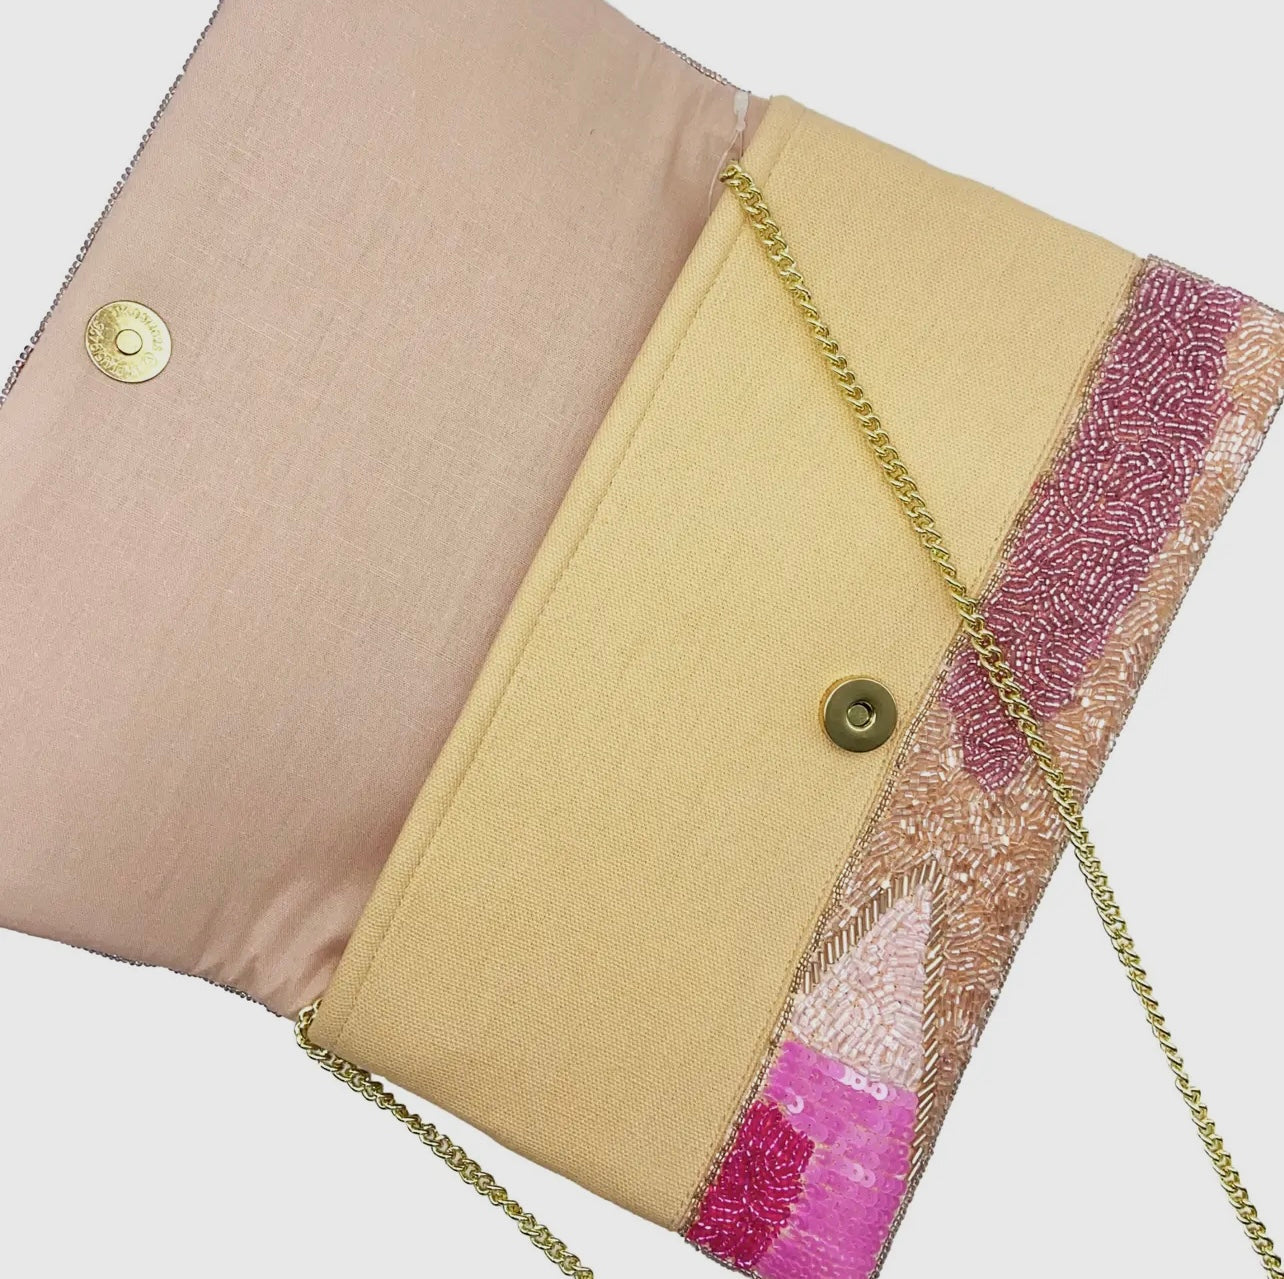 Shades of Pink Handmade Beaded Clutch